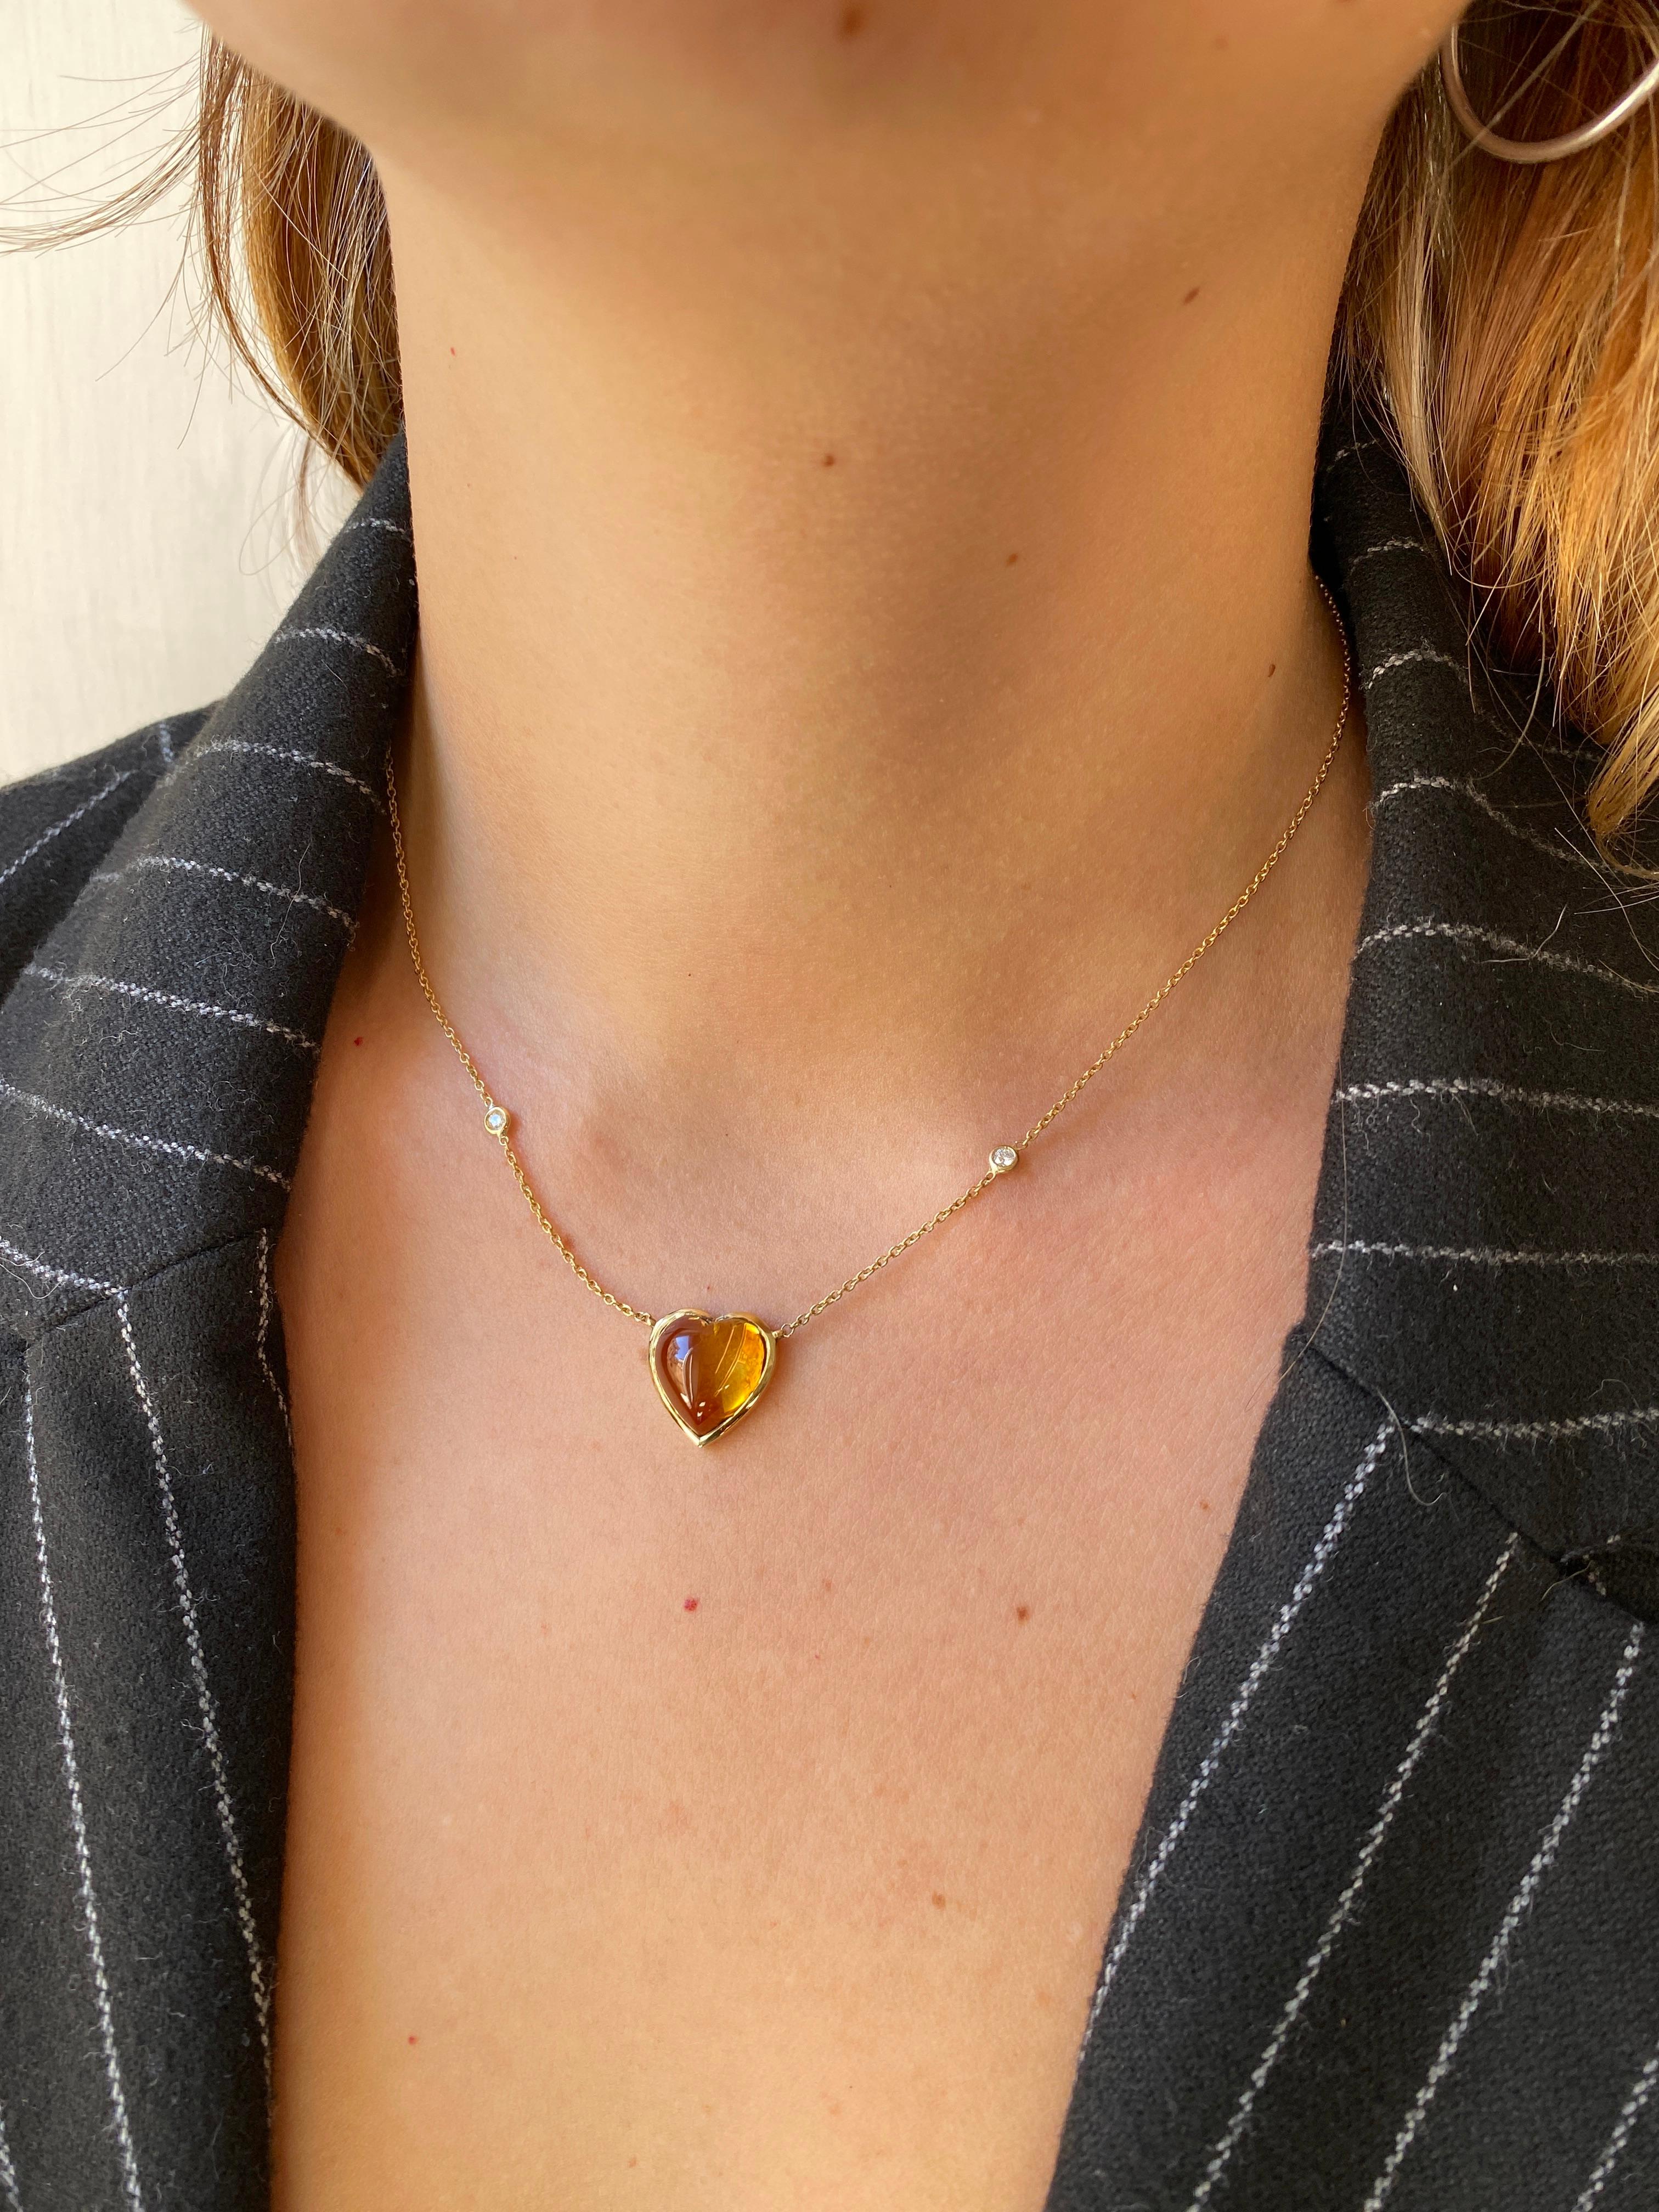 Ready to ship. Introducing the Handmade Rossella Ugolini Design Collection, this 18K Yellow Gold necklace is an embodiment of timeless elegance. The focal point of this necklace is a stunning yellow Citrine stone, carefully cut into a domed heart